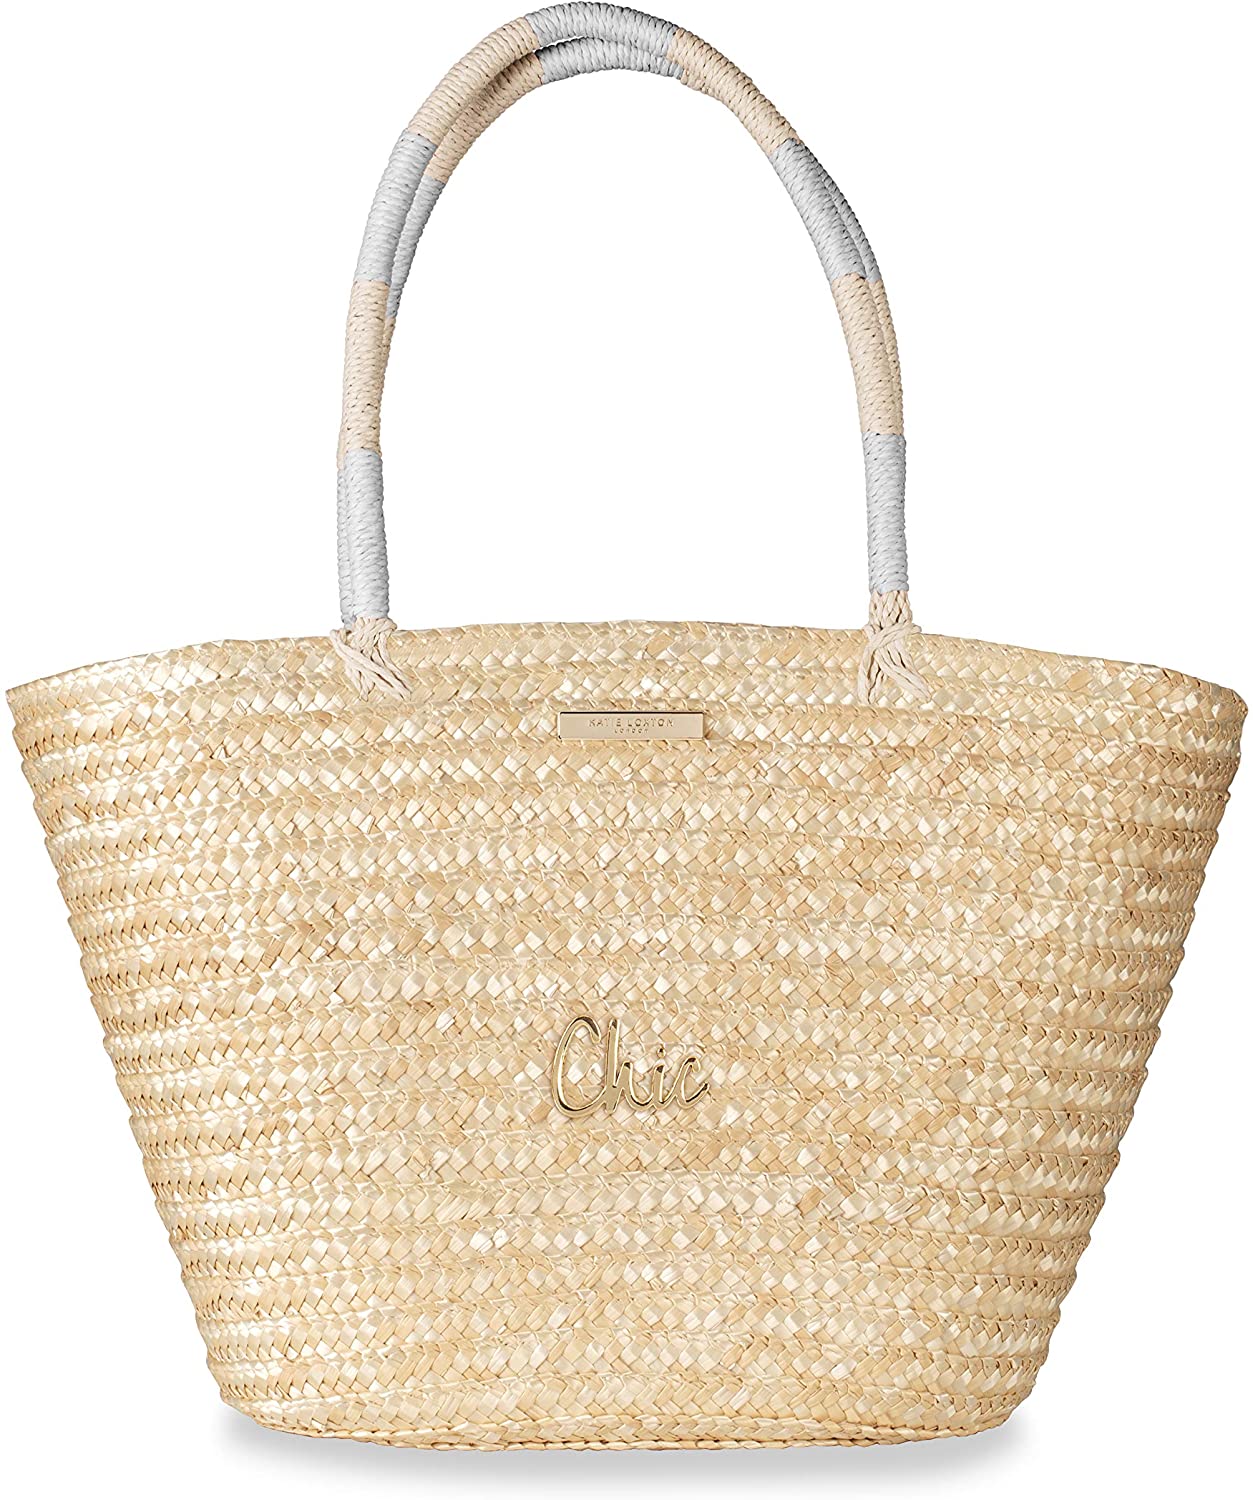 Price:$21.95    Katie Loxton Sofia Chic Natural Straw Women's Large Linen Lined Shoulder Tote Bag  Clothing